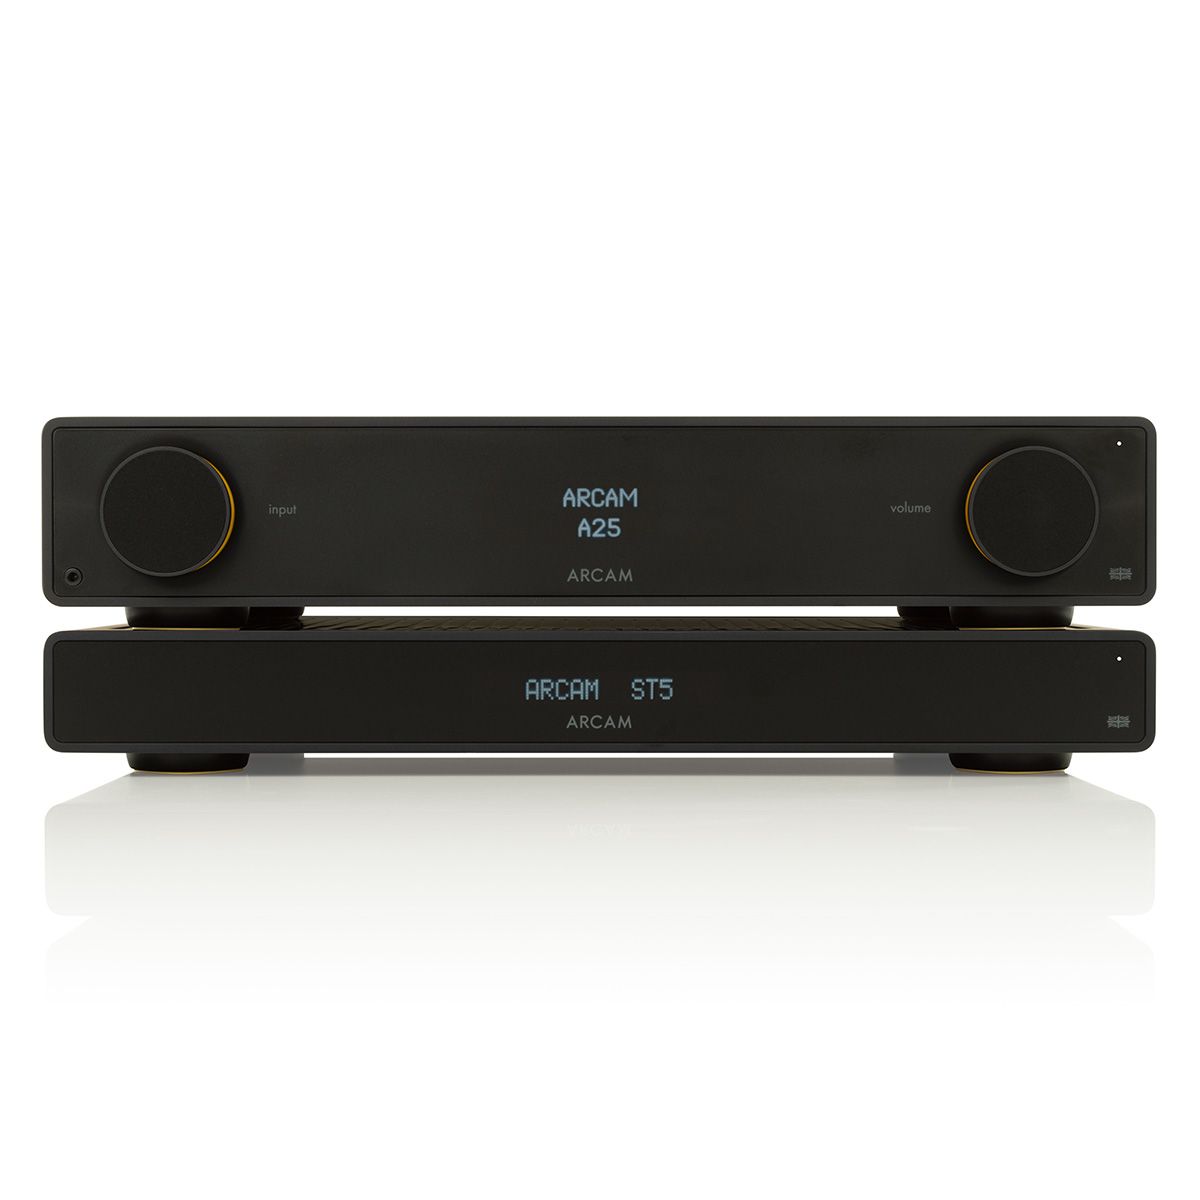 Arcam ST5 Streaming Music Player stacked with Arcam A25